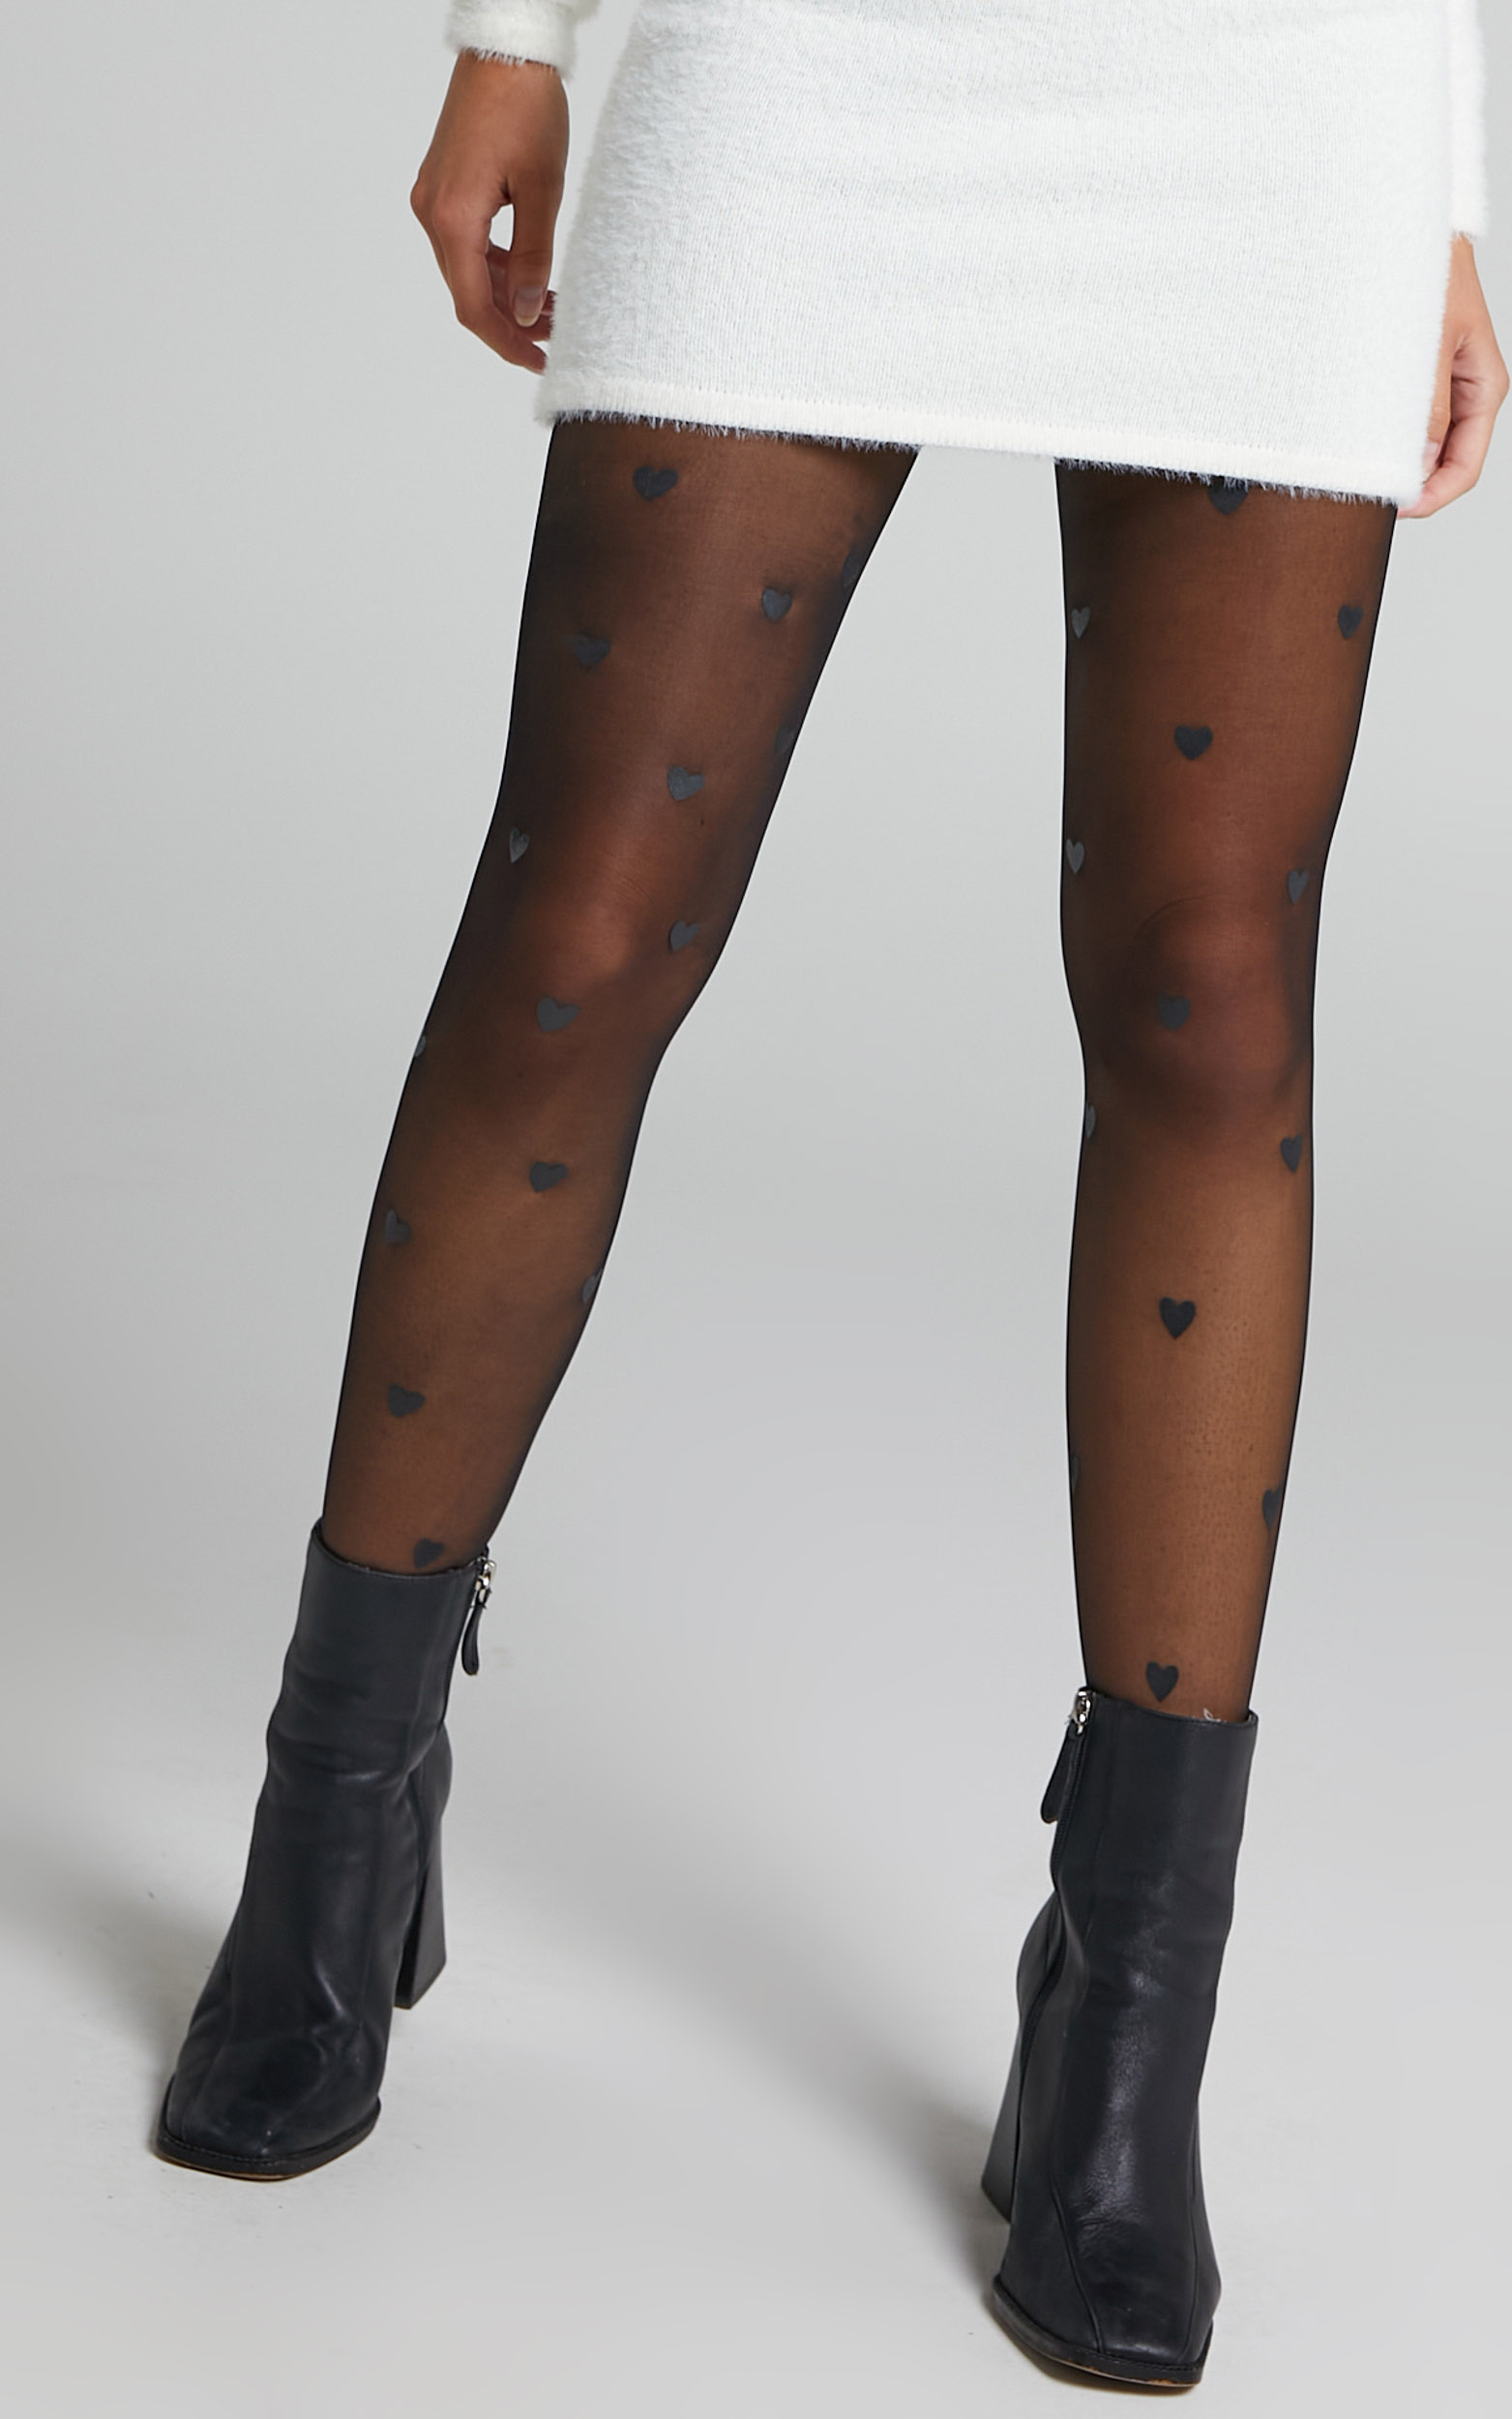 Grenville Stockings in Black - OneSize, BLK1, hi-res image number null